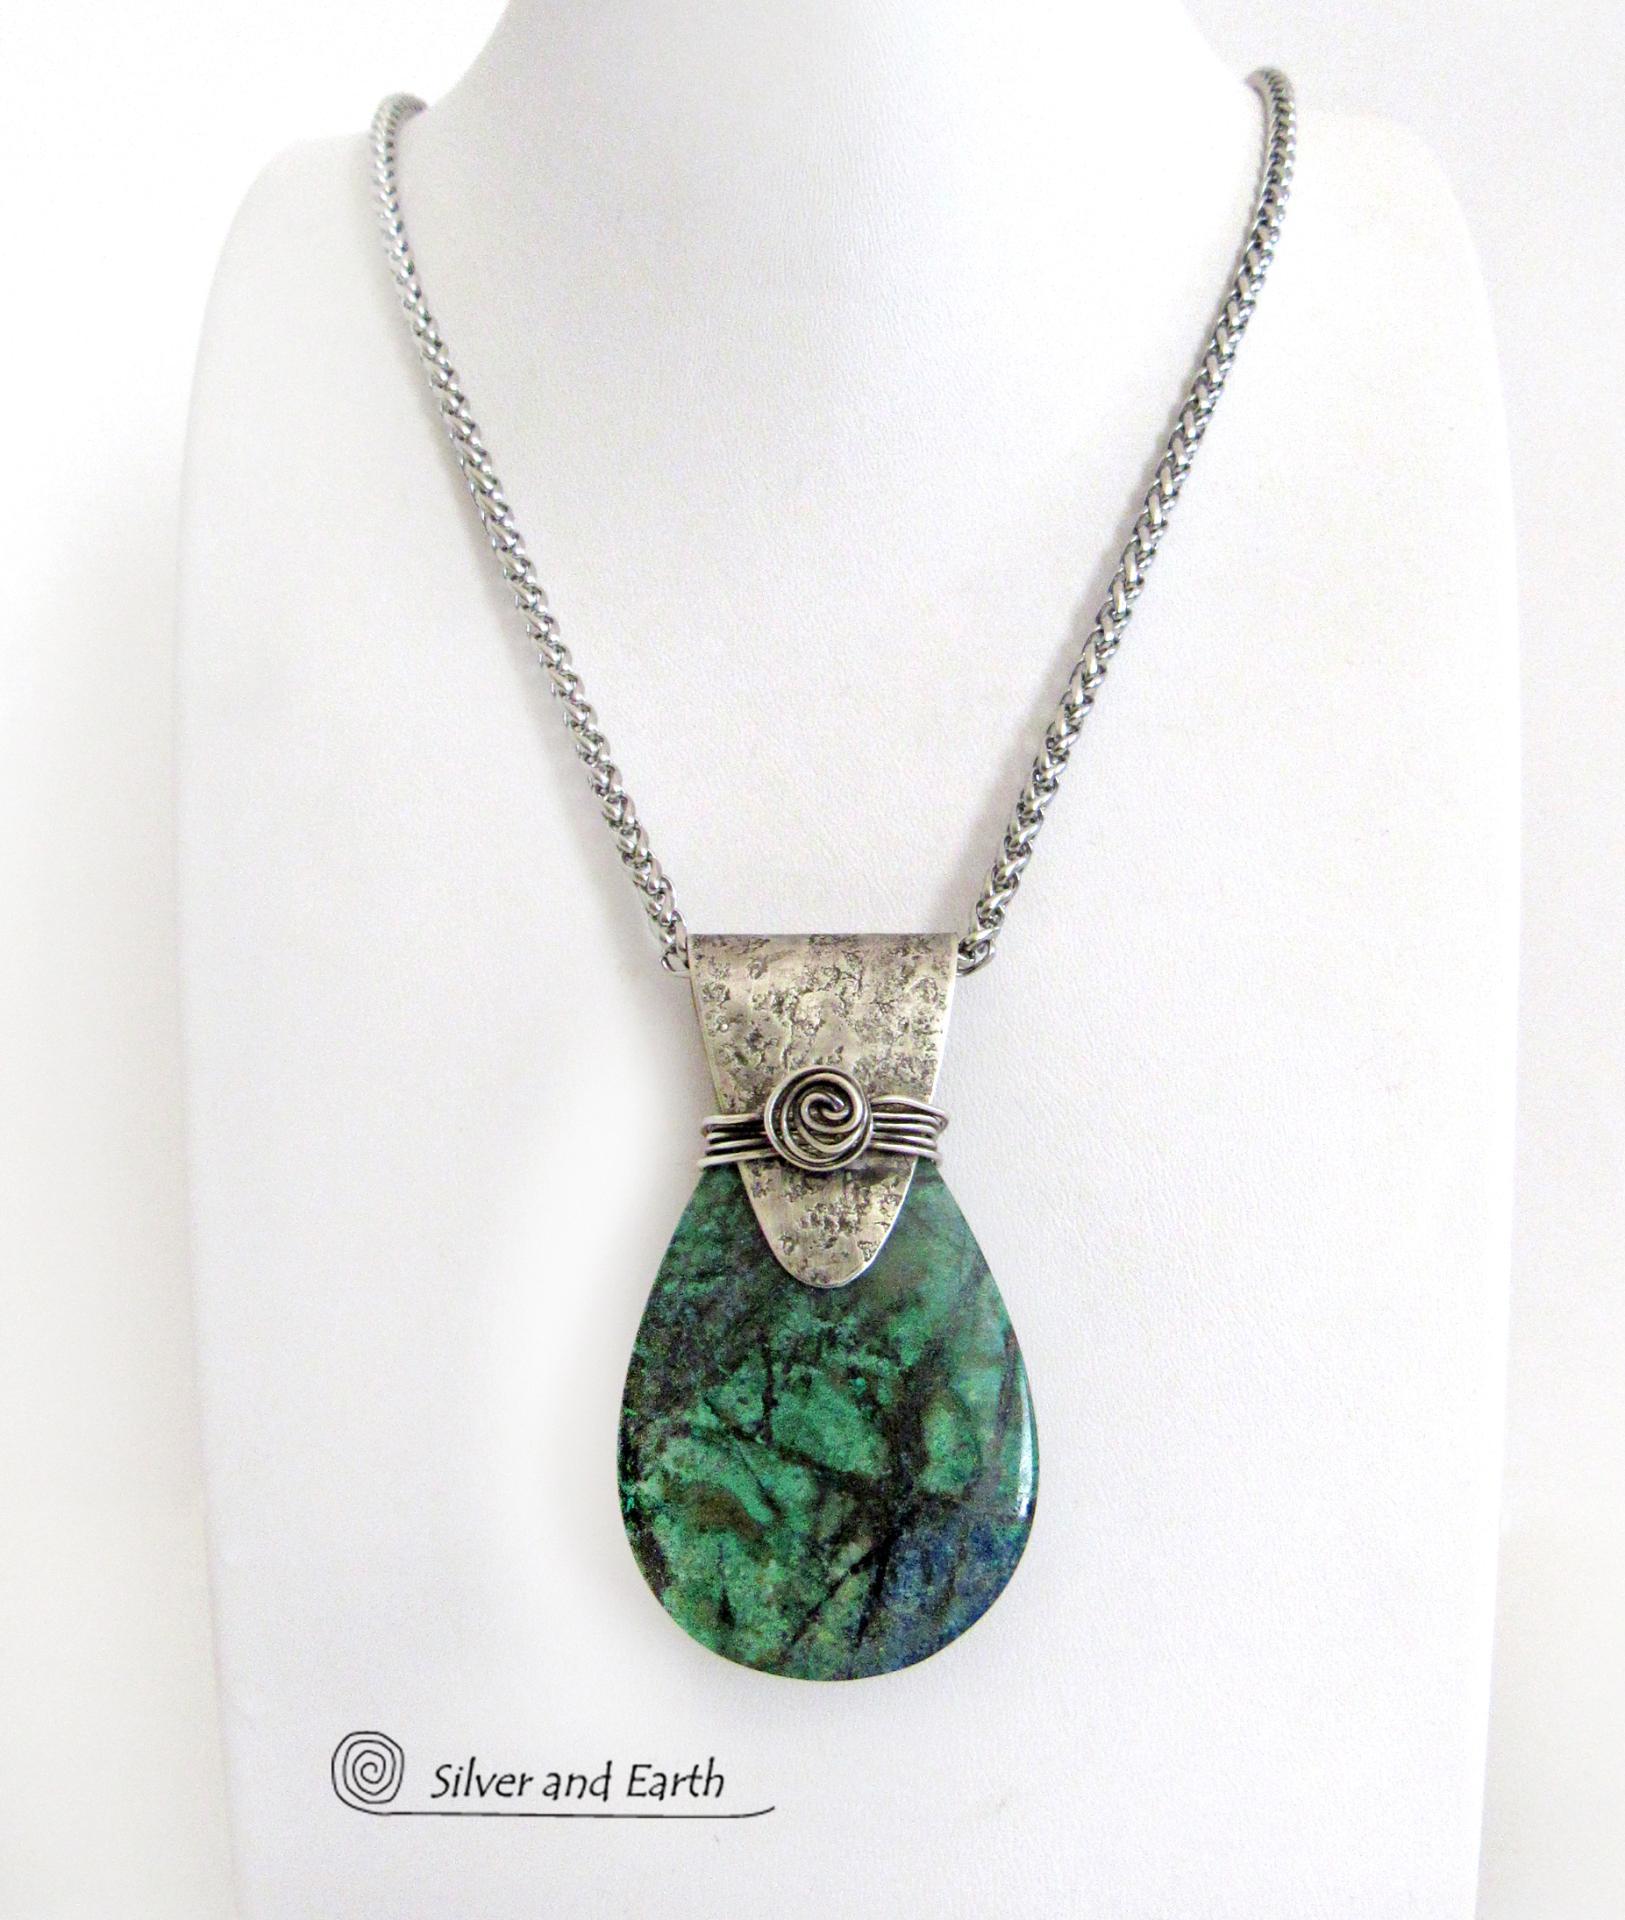 Blue Green Chrysocolla Sterling Silver Necklace - Unique One of a Kind Natural Gemstone Jewelry 